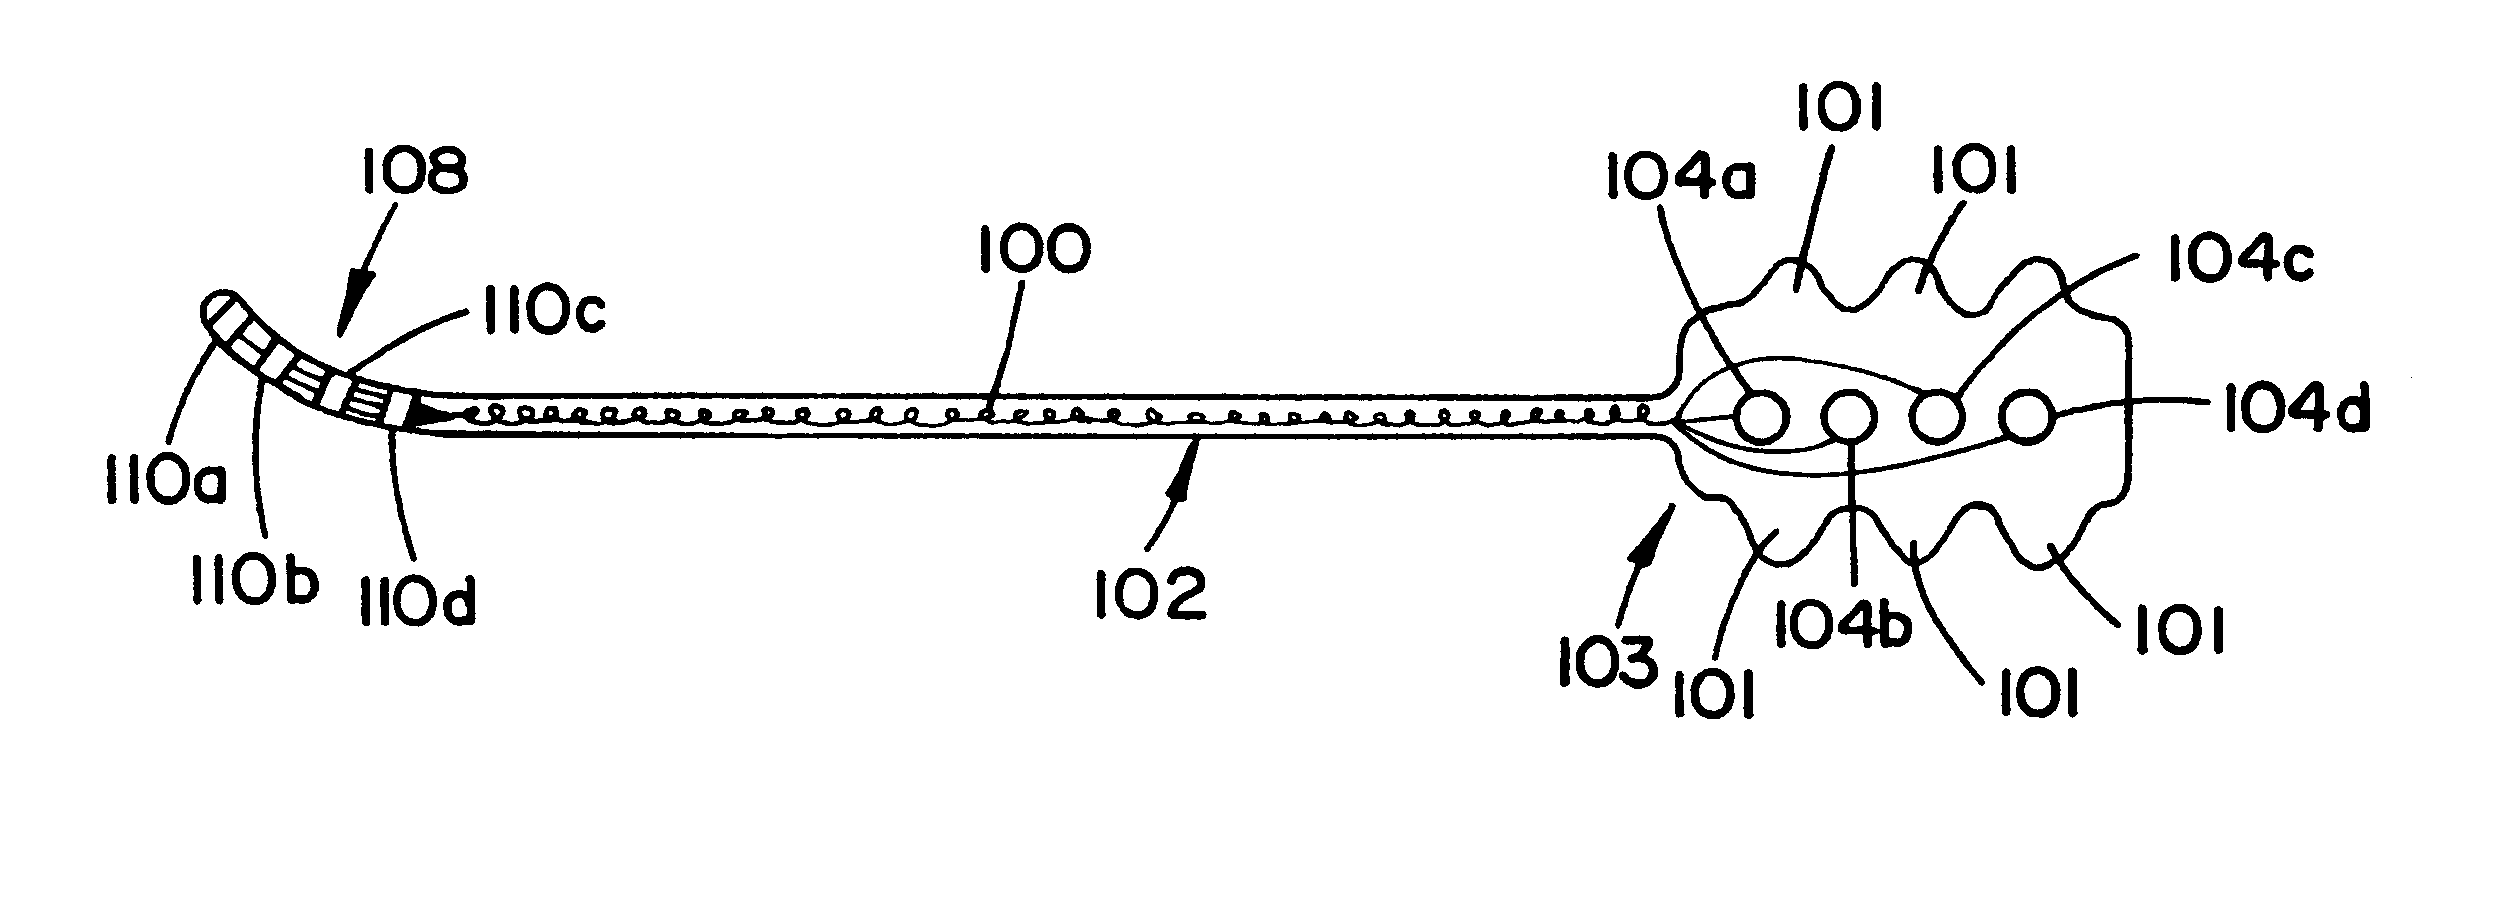 Spinal cord electrode assembly having laterally extending portions